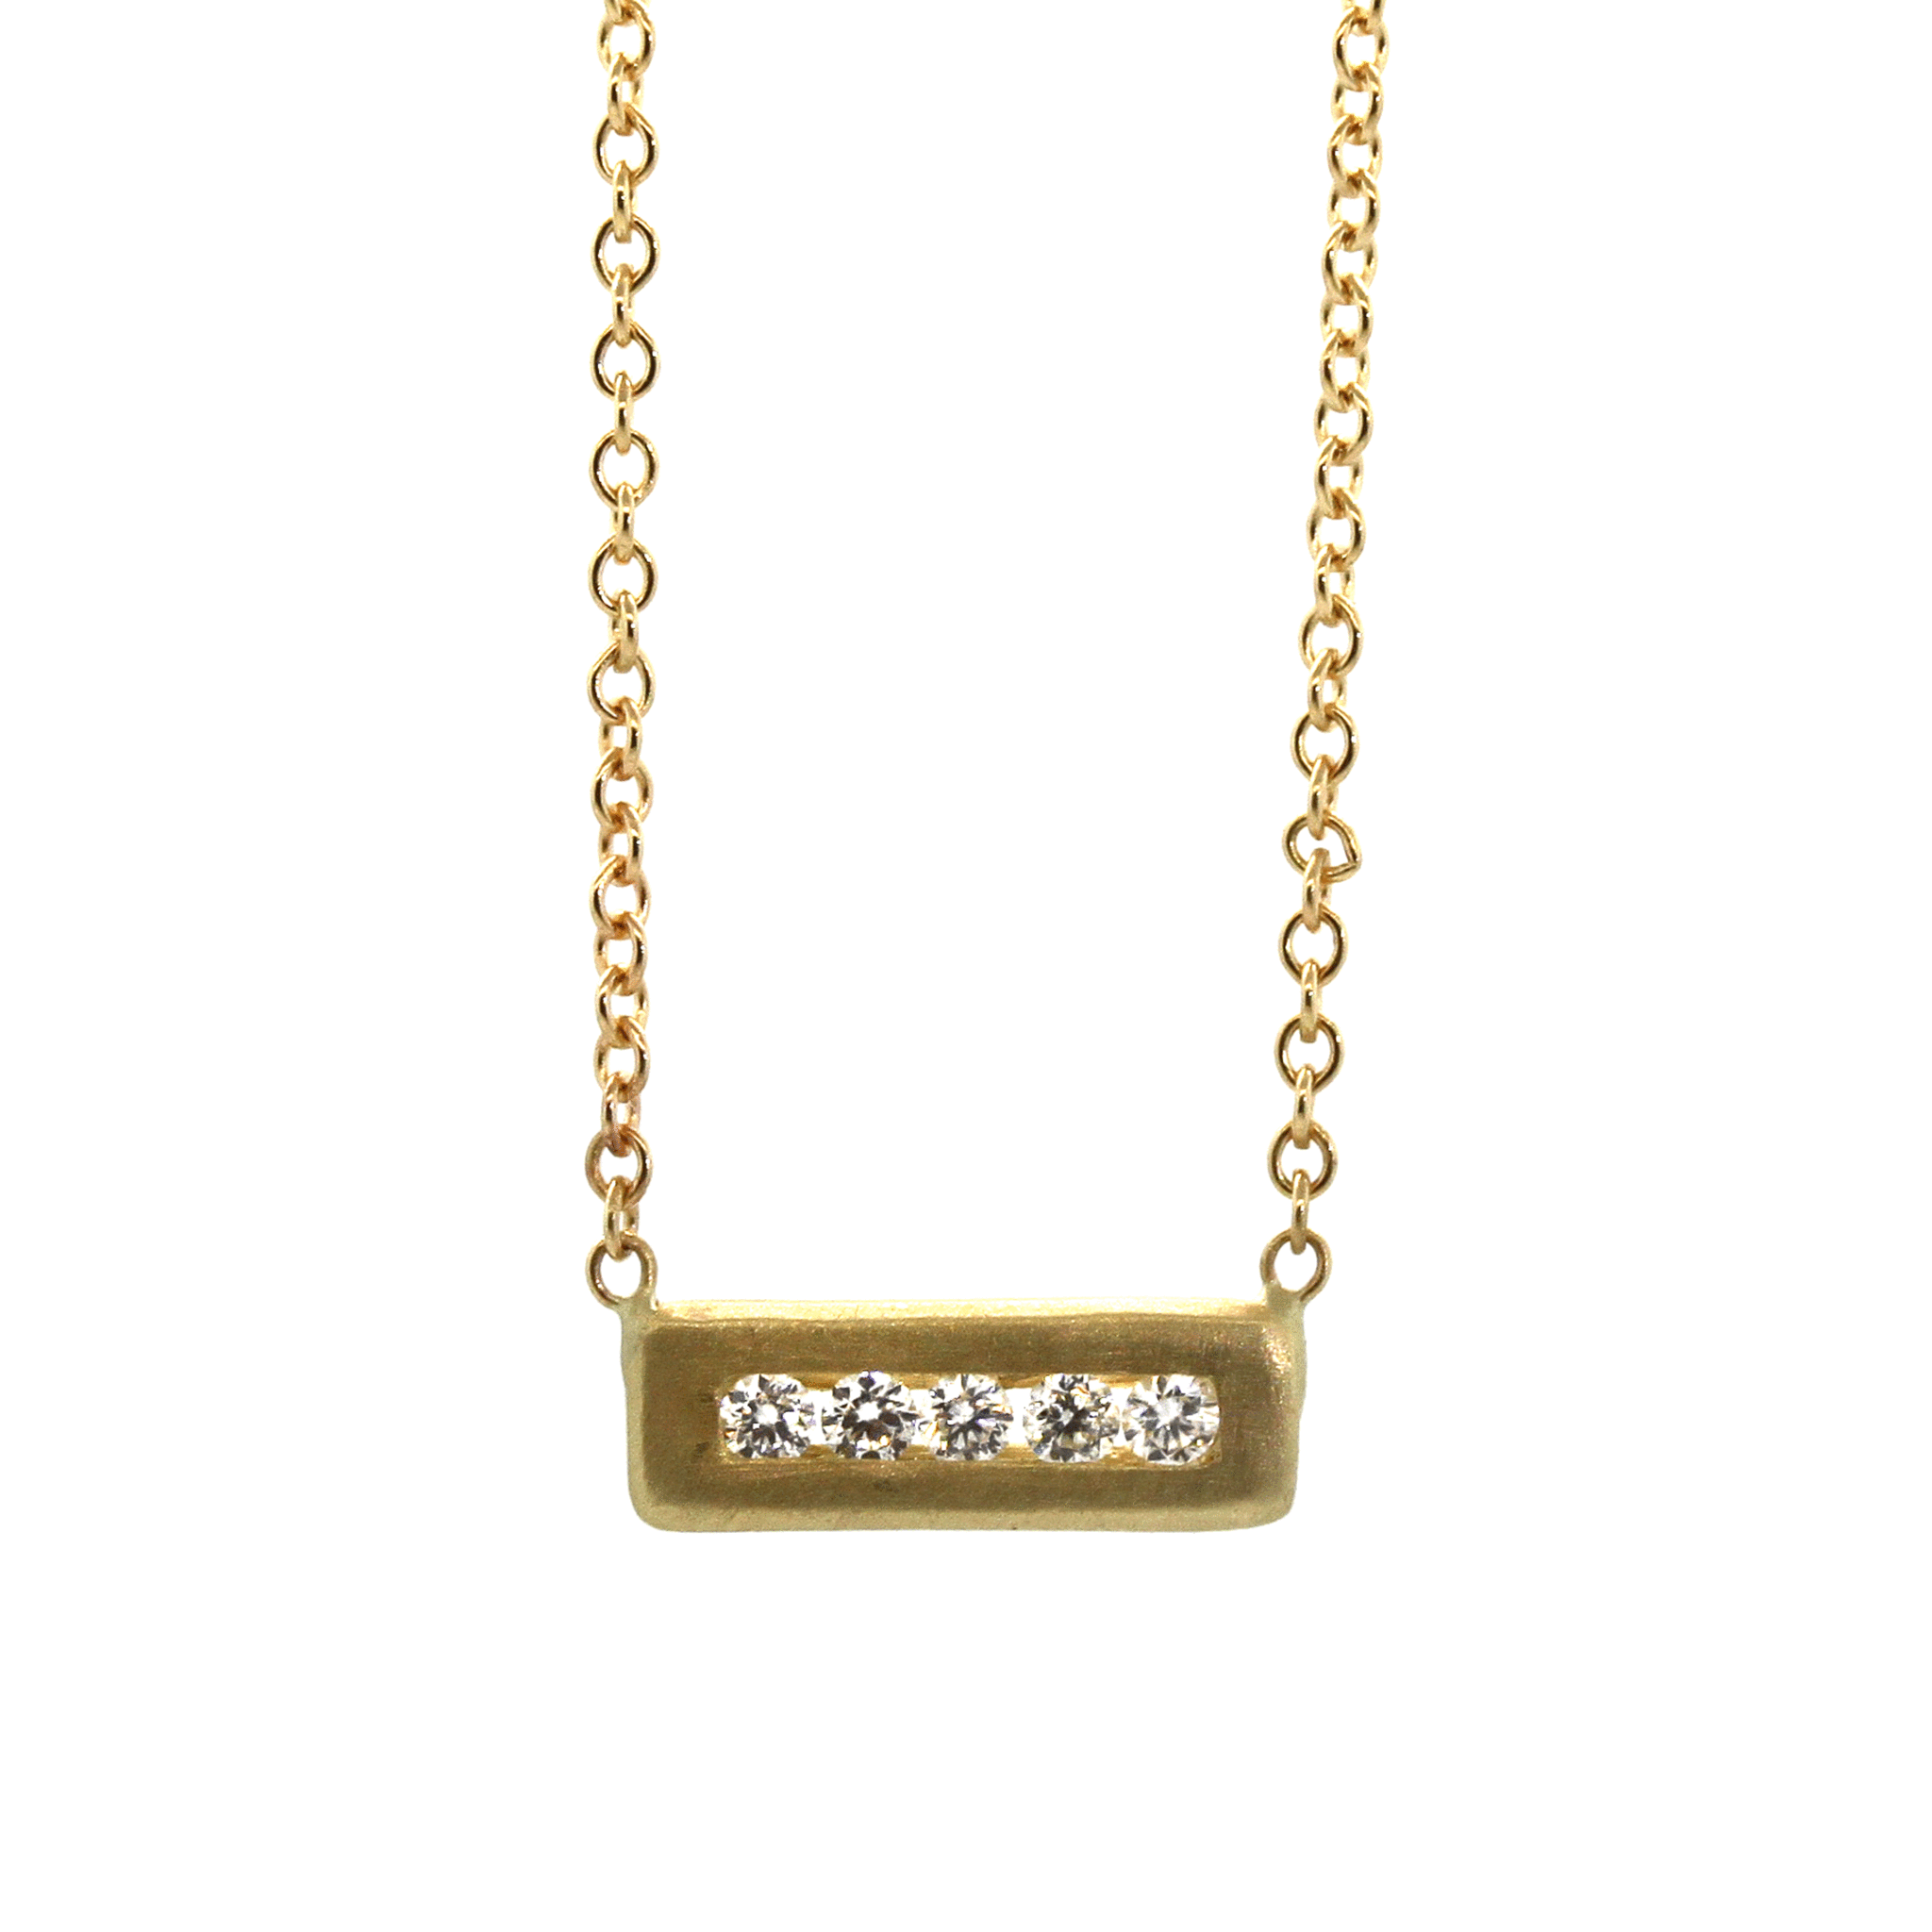 Diamond Brick Necklace - Handcrafted Gold Necklace - Rebecca Lankford Designs - 1